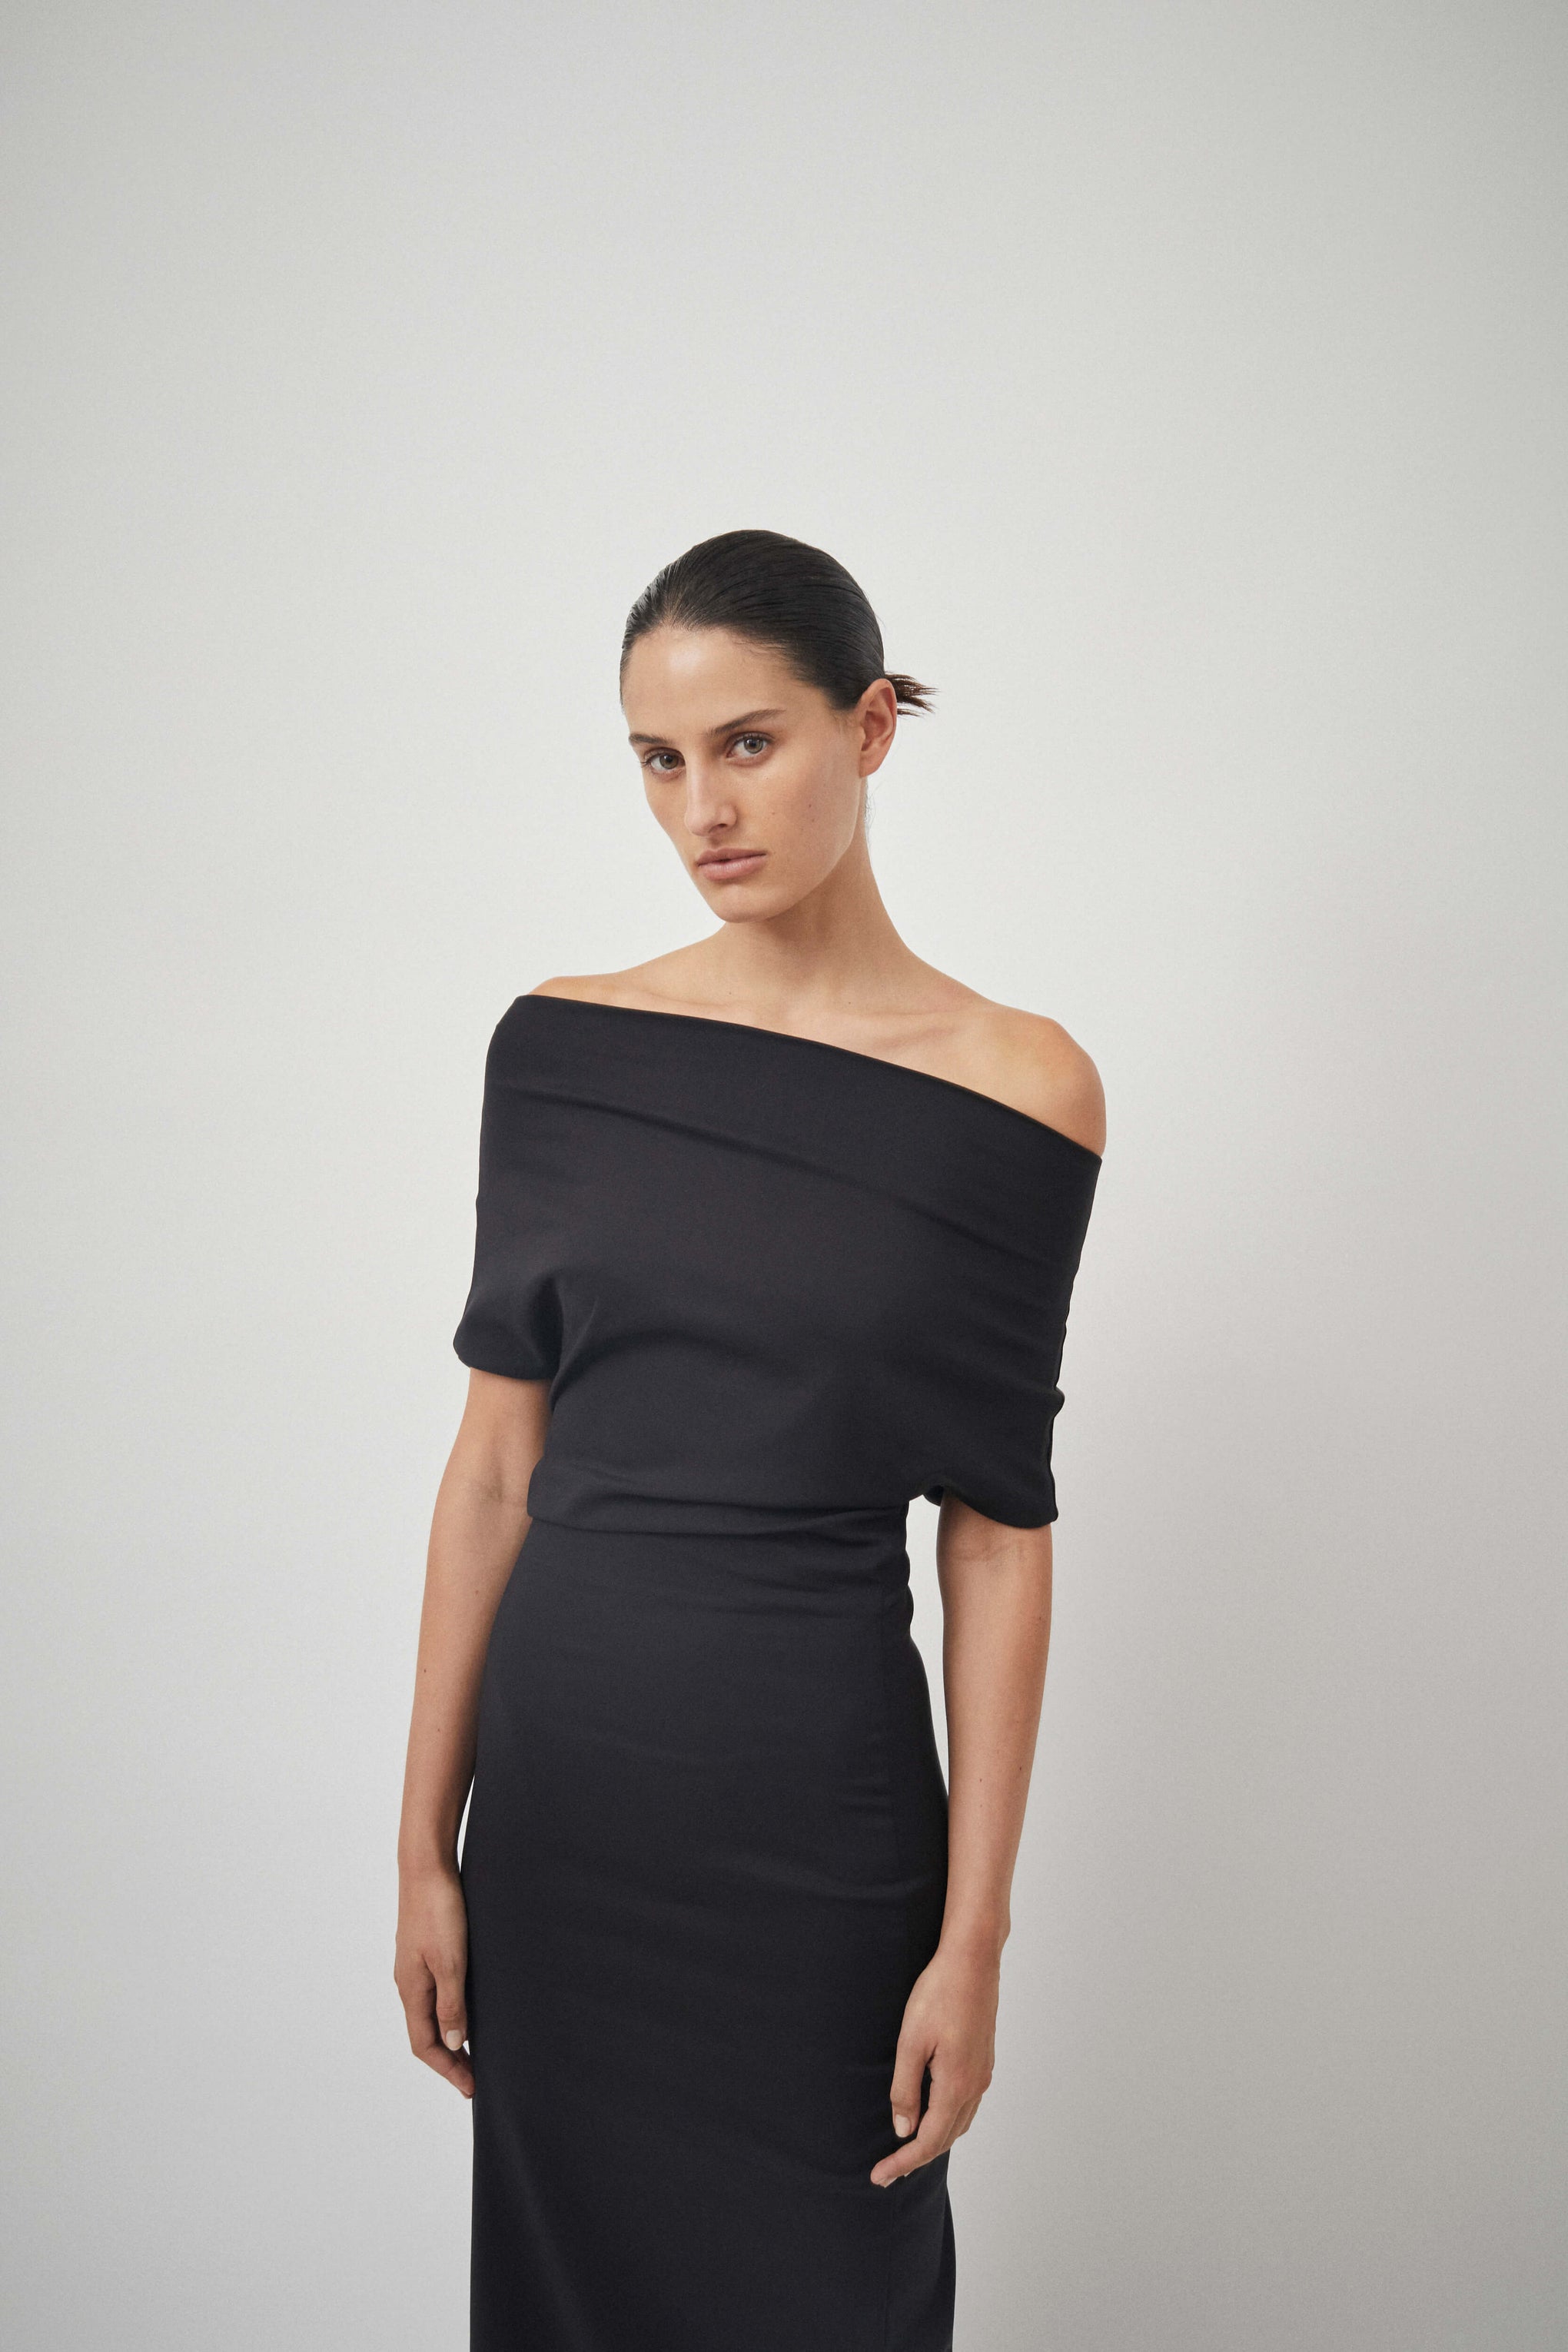 Beare Park Jersey Glove Dress in Black available at TNT The New Trend Australia.